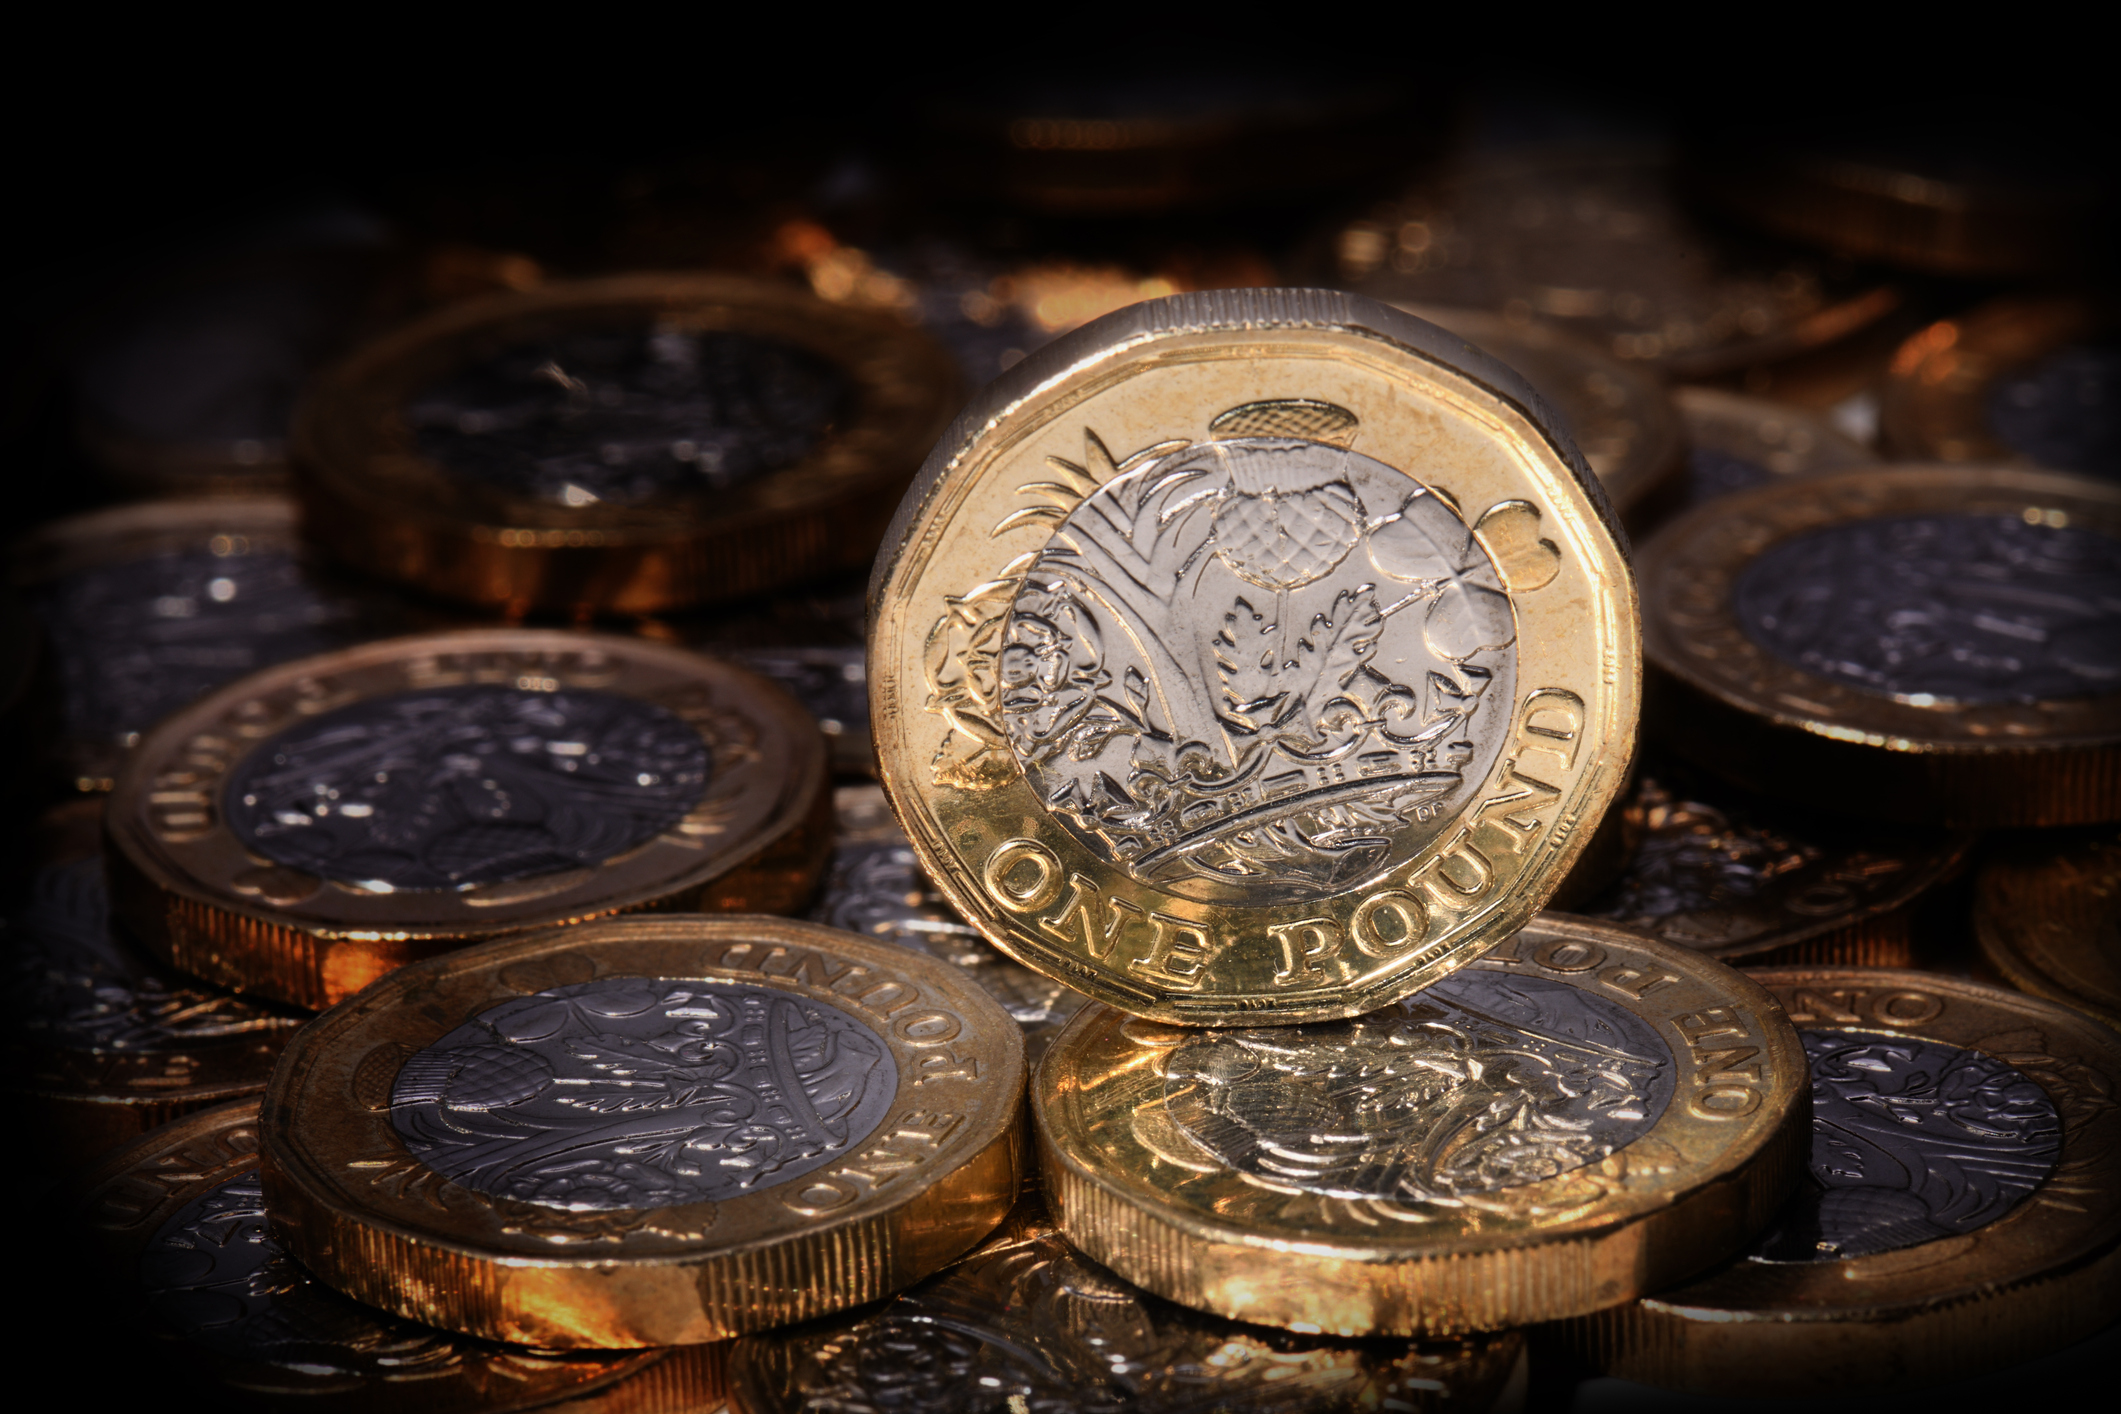 GBP holds above 1.24 support level as inflation eyed